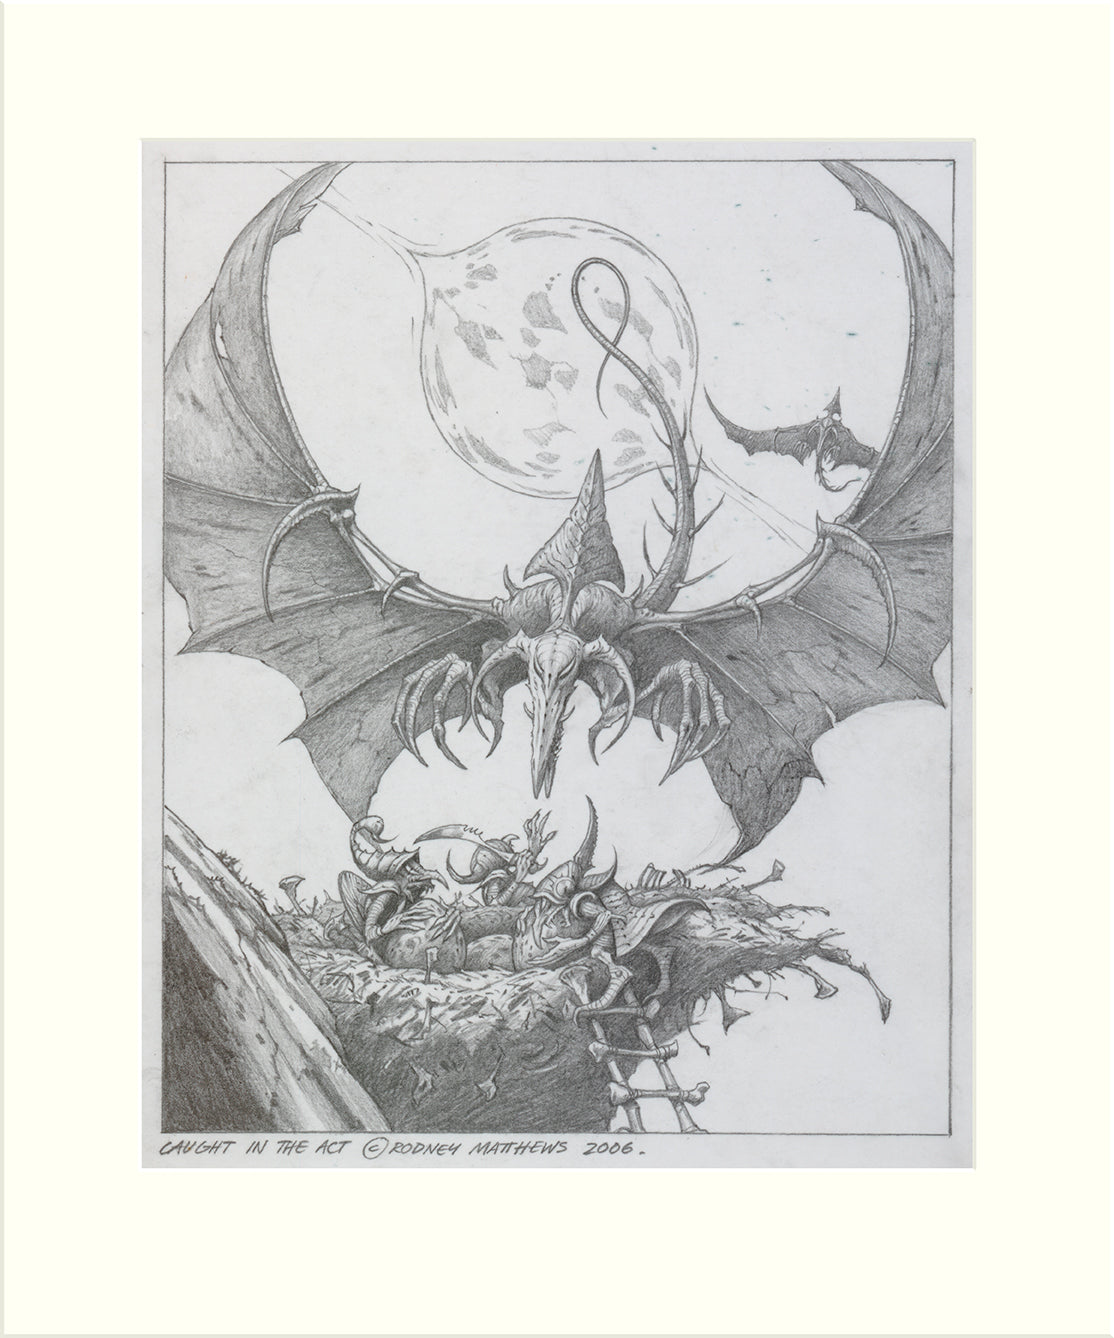 Caught in the Act (Stormzone) original pencil drawing by Rodney Matthews